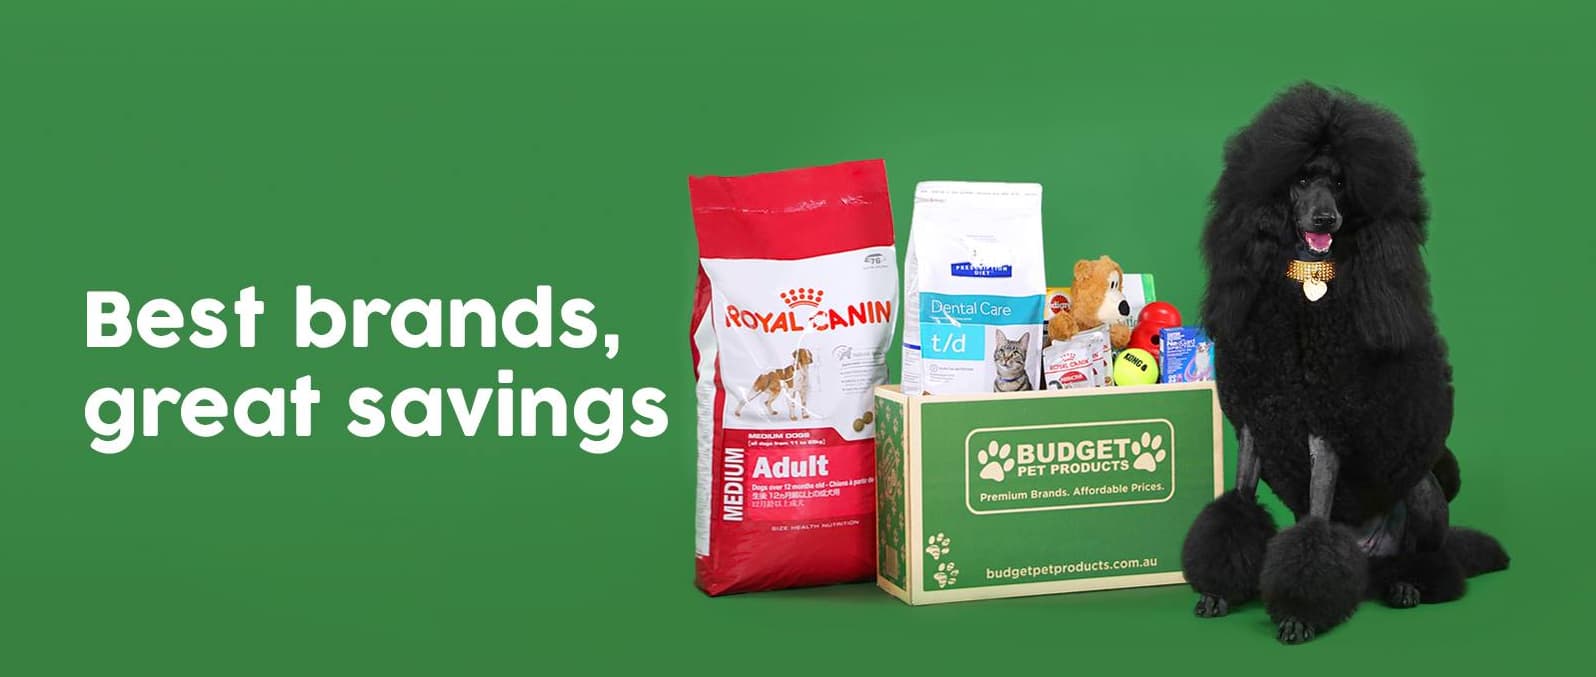 All Budget Pet Products Australia Promo Codes & Coupons